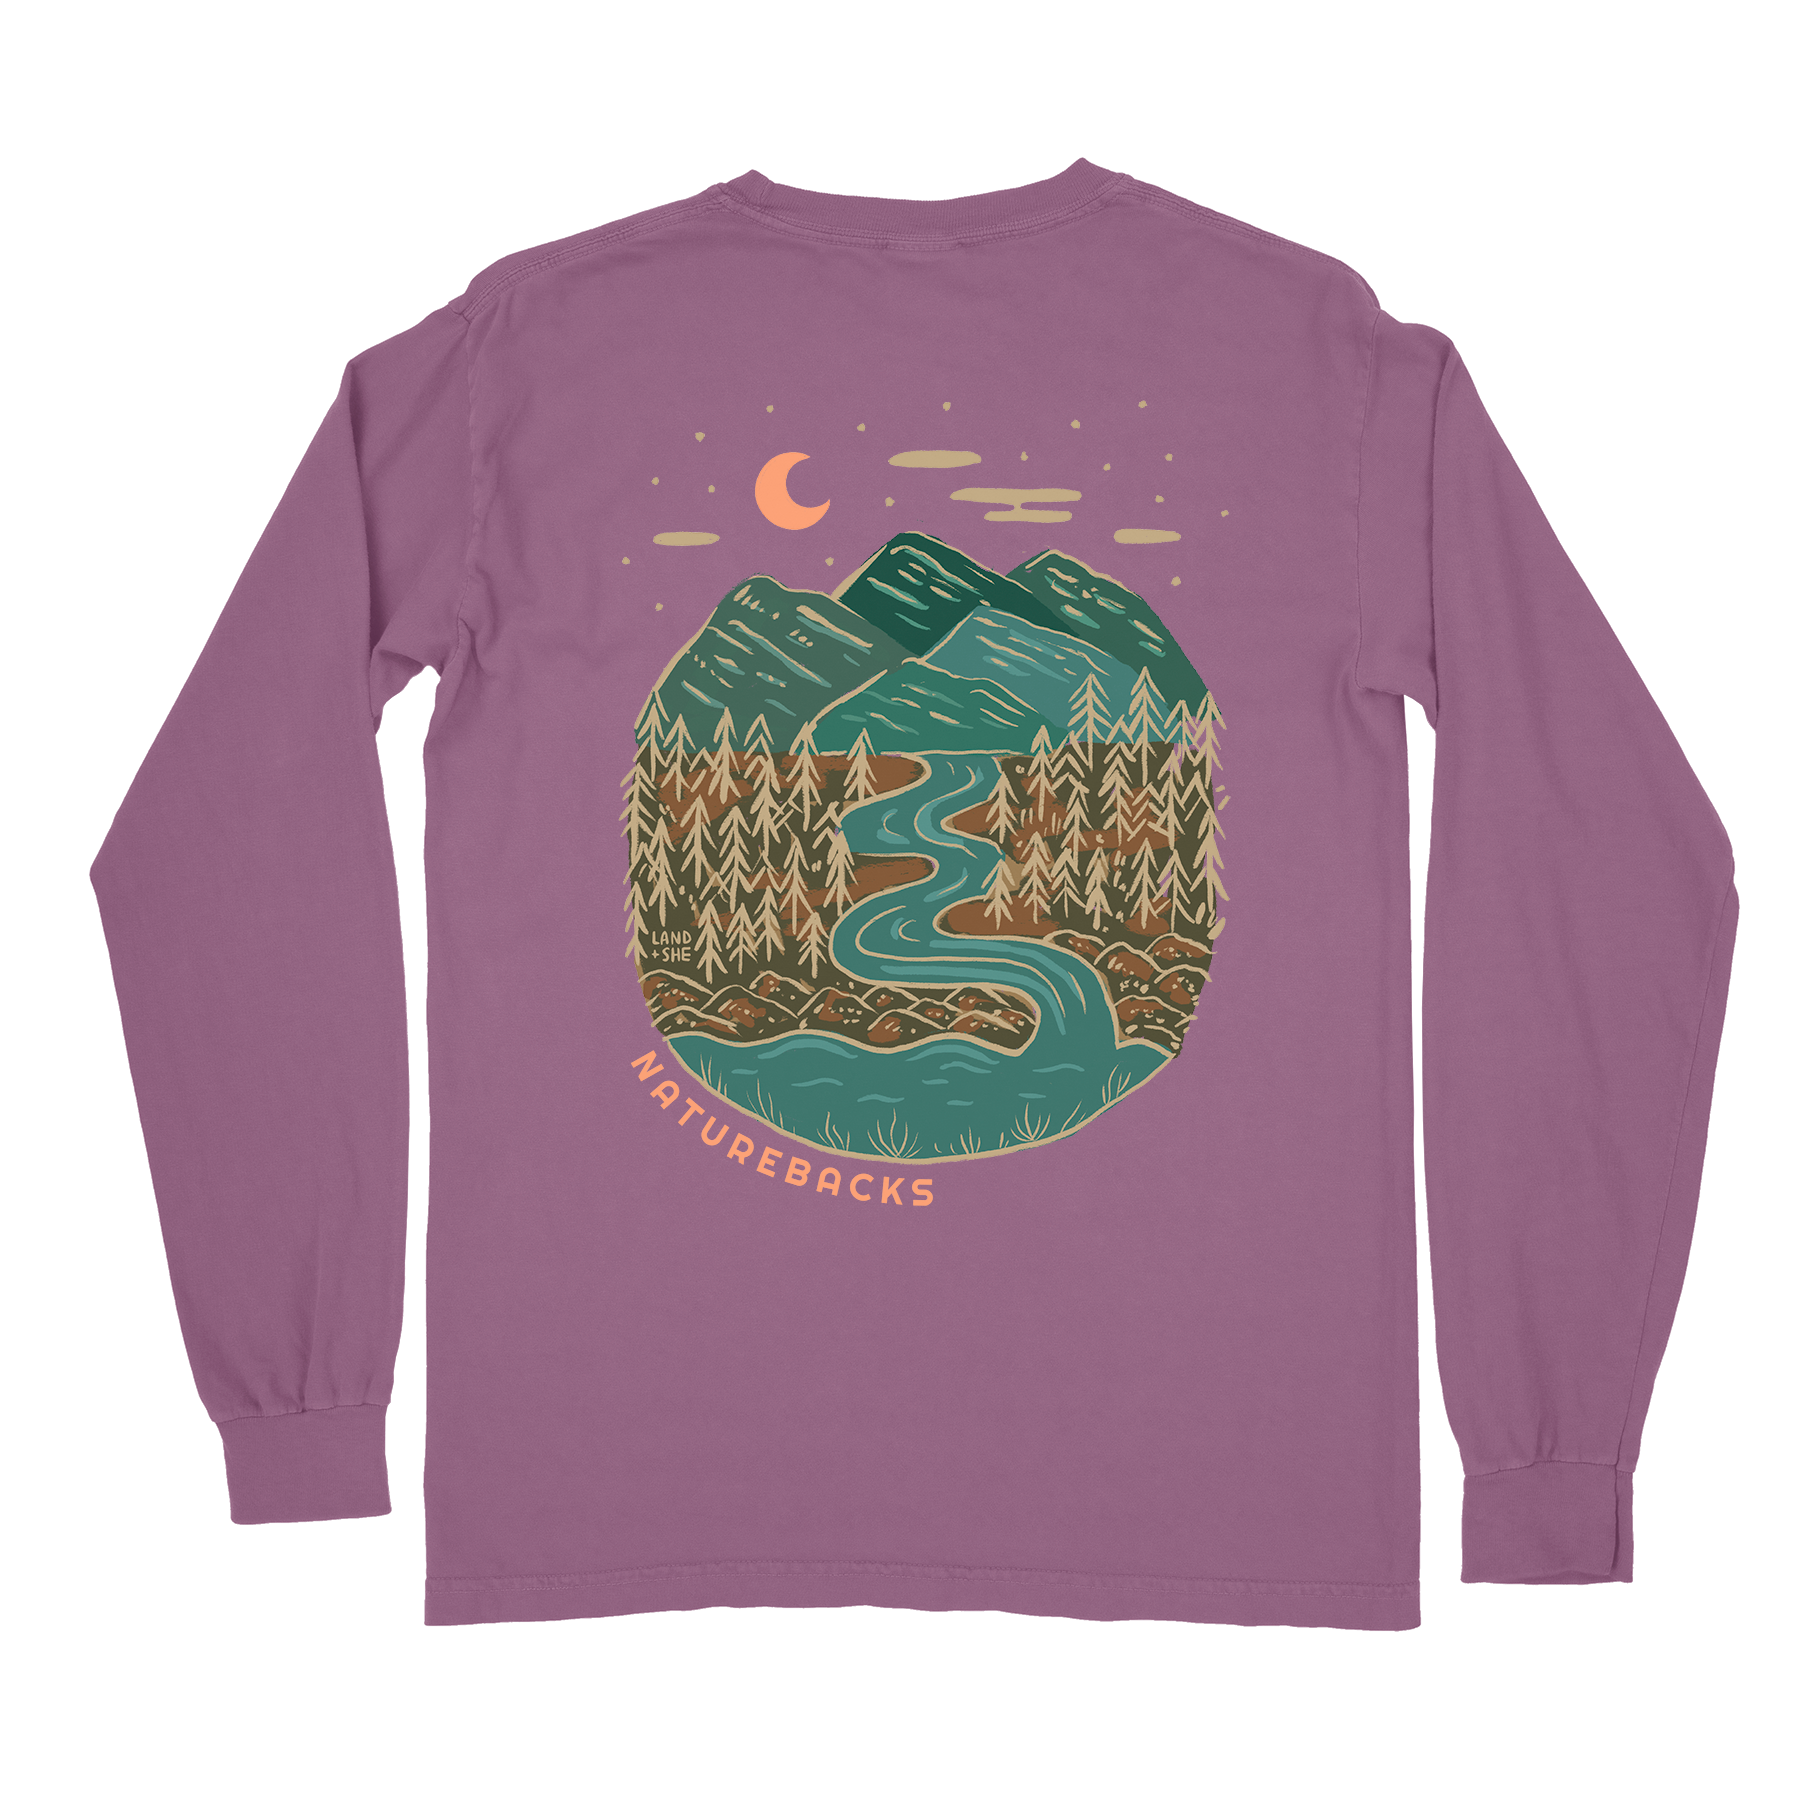 Nature Backs Comfort Colors Evergreen Berry Long Sleeve T-Shirt | Nature-Inspired Design on Ultra-Soft Fabric